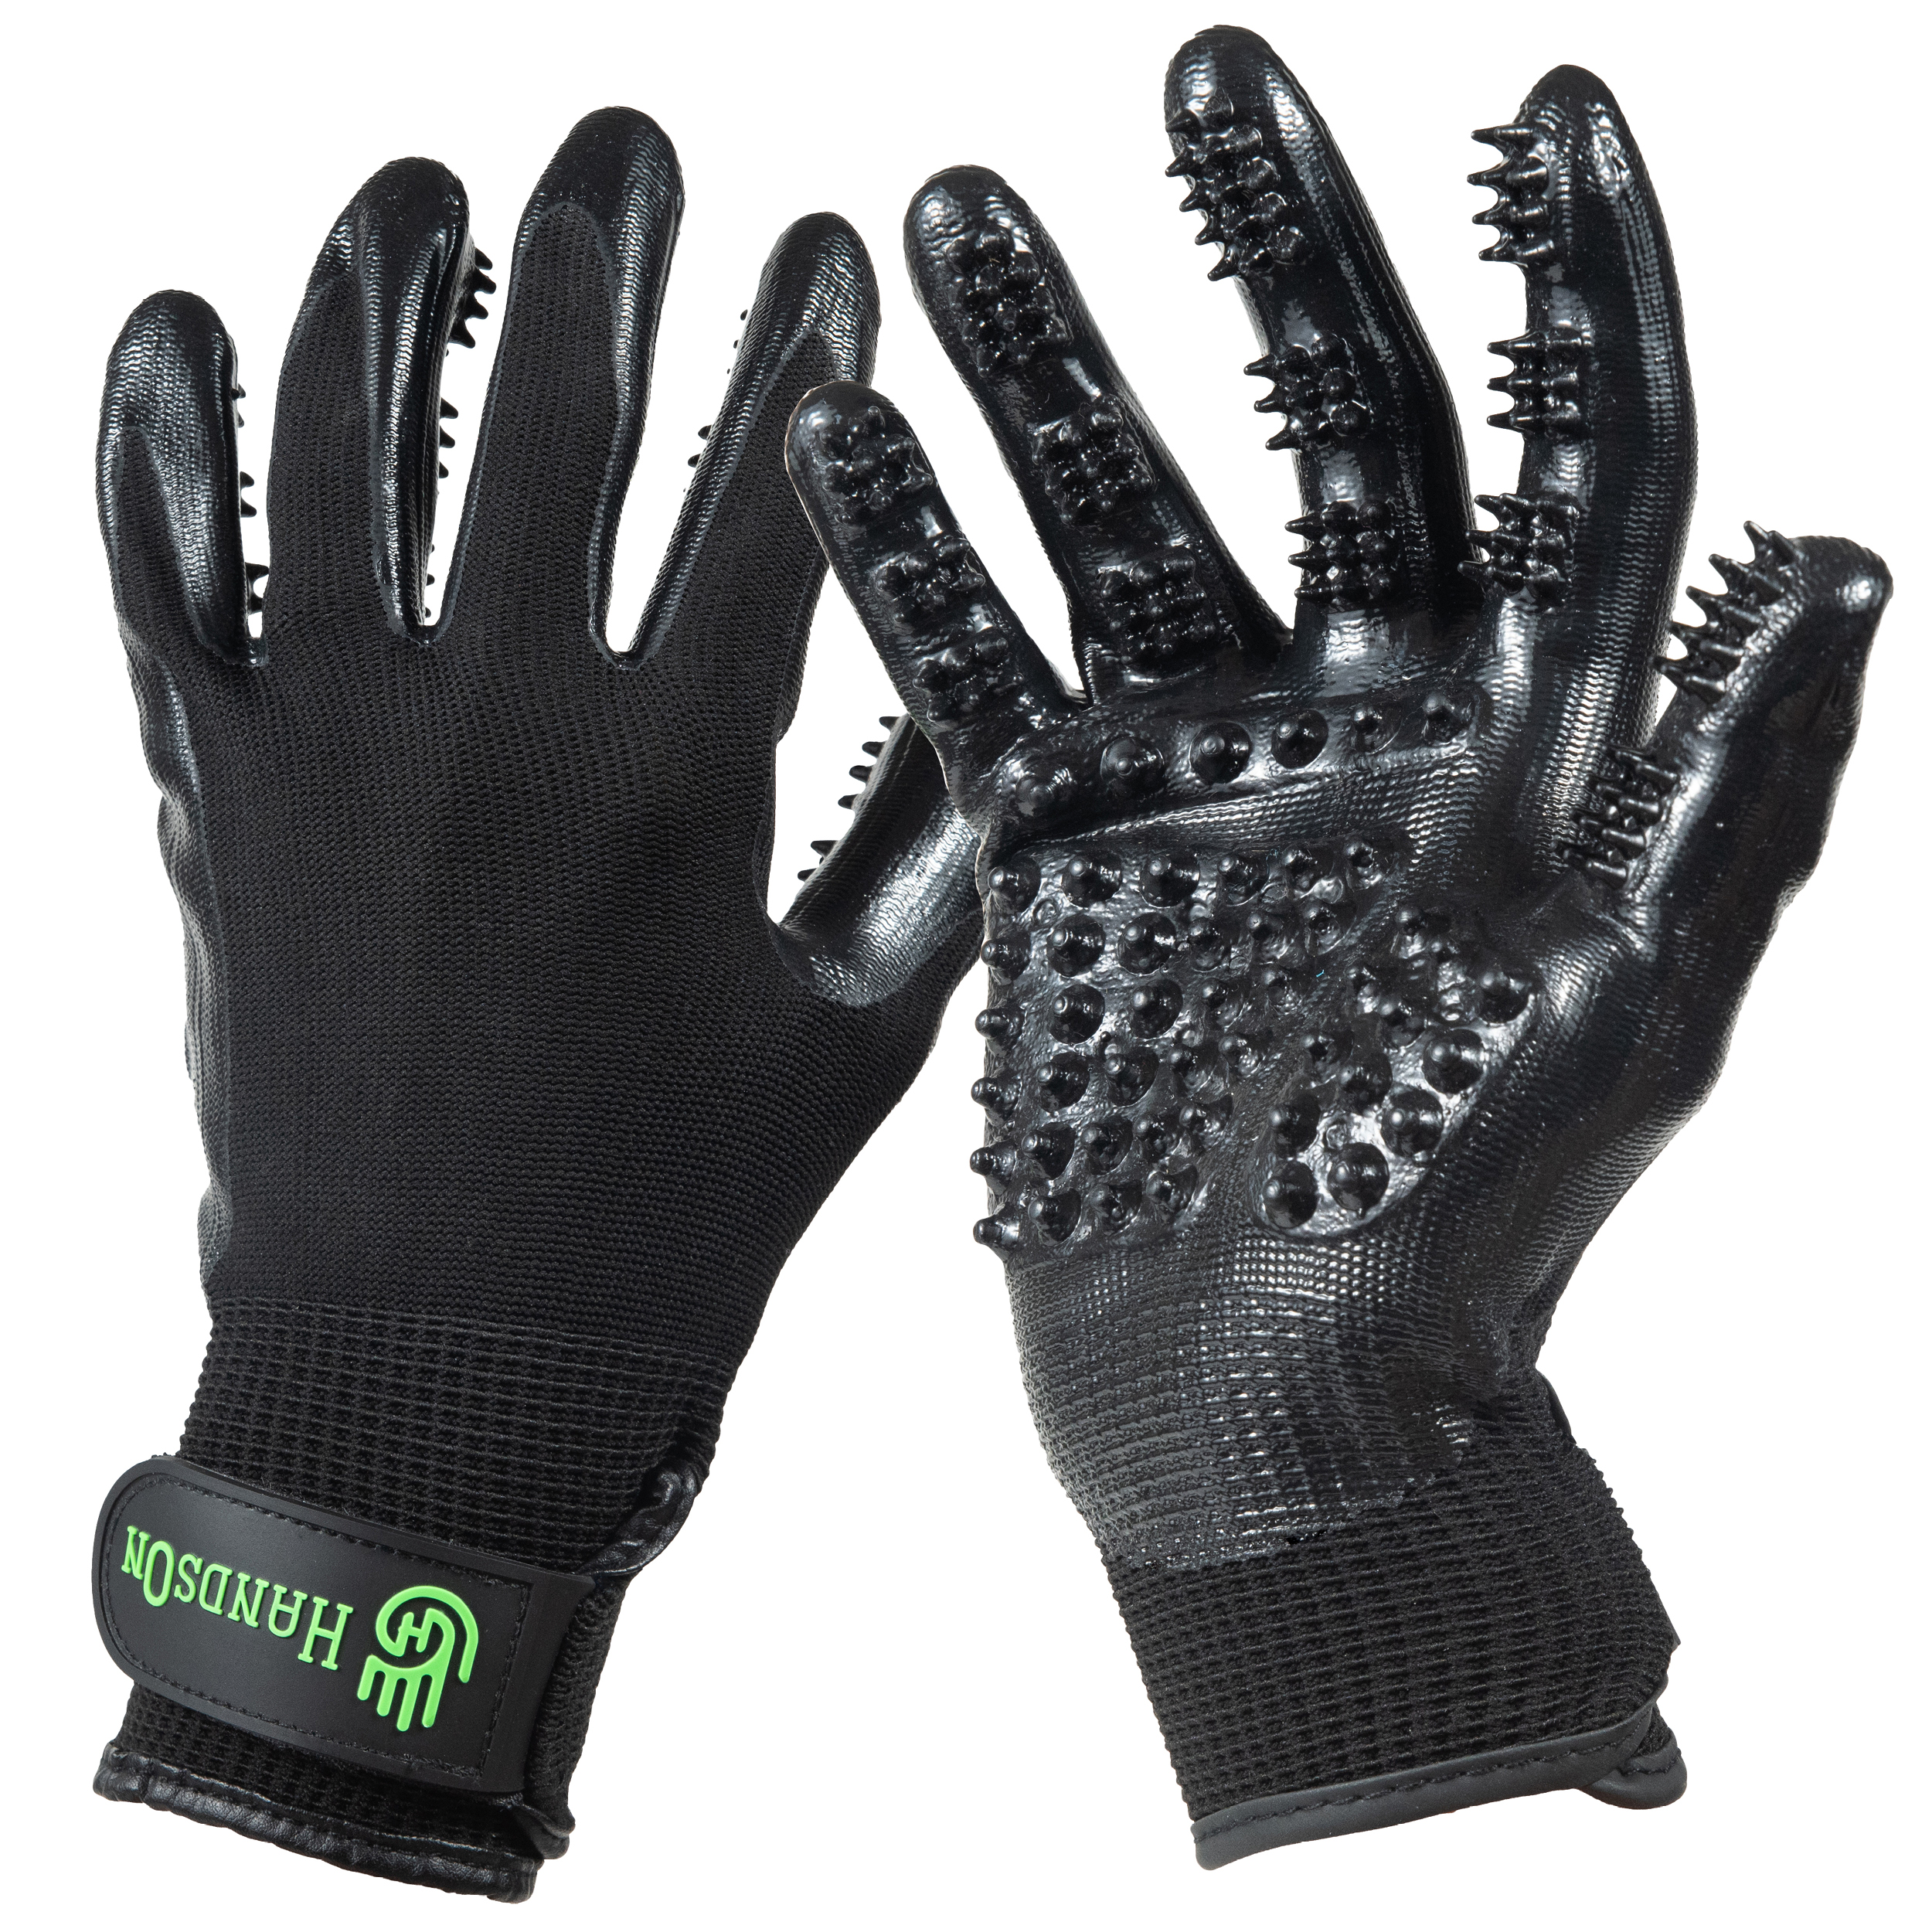 Body By Jake Men's Workout Gloves NWT several sizes available ** 